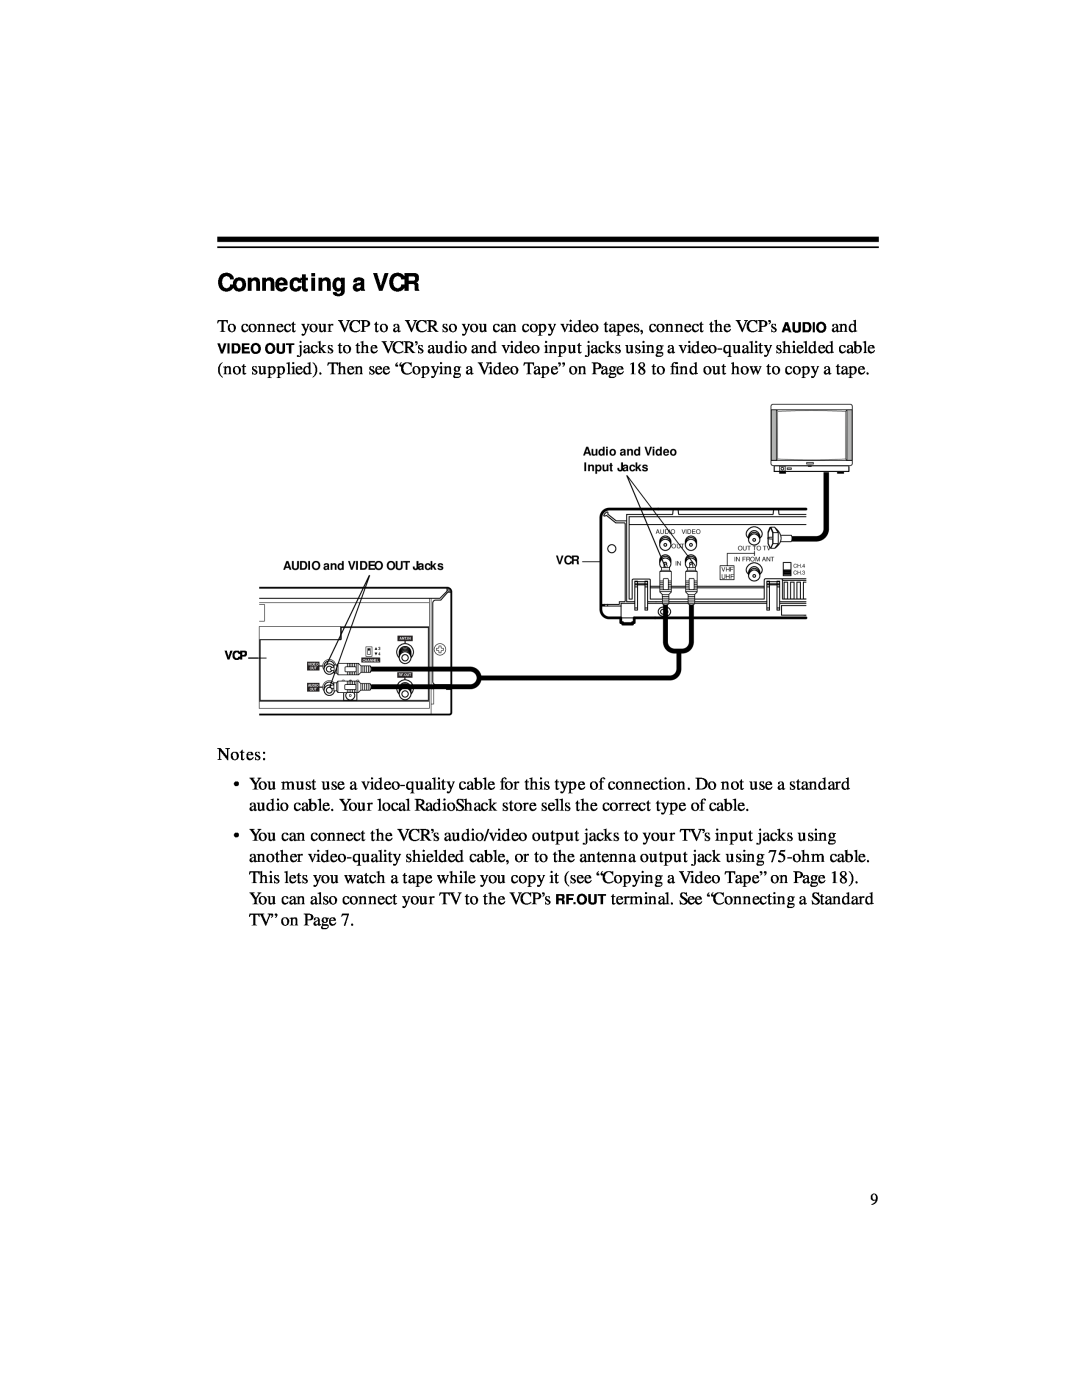 RCA 40, 50 owner manual Connecting a VCR 